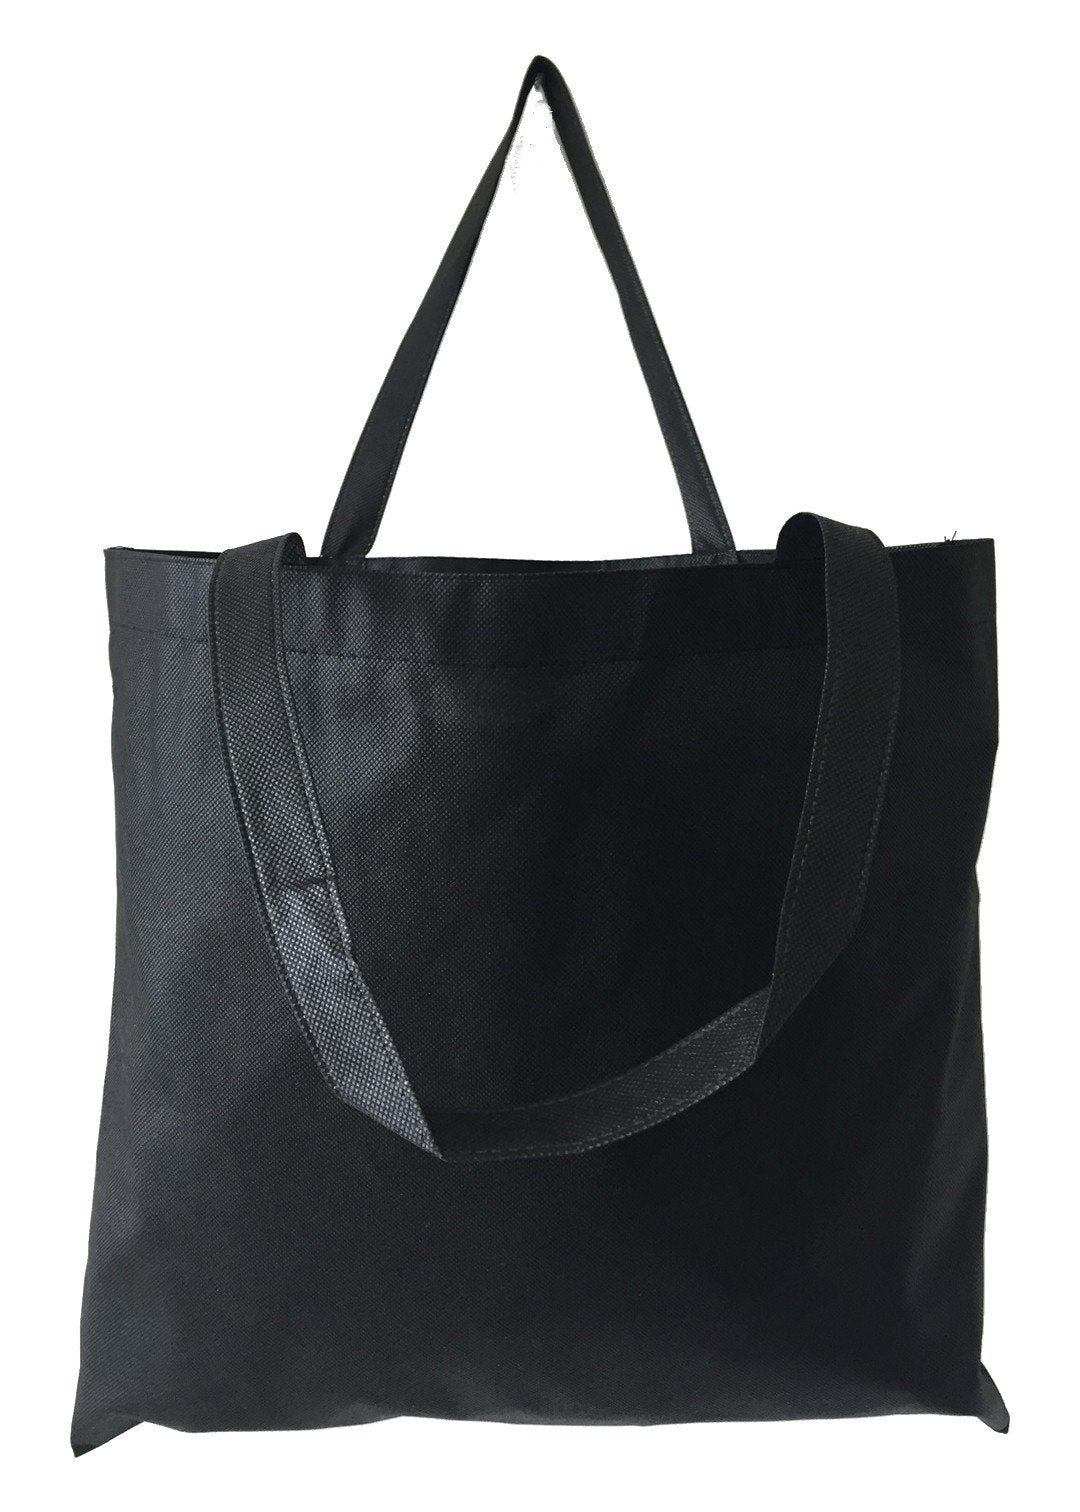 Cheap Budget Large Tote Bags Black